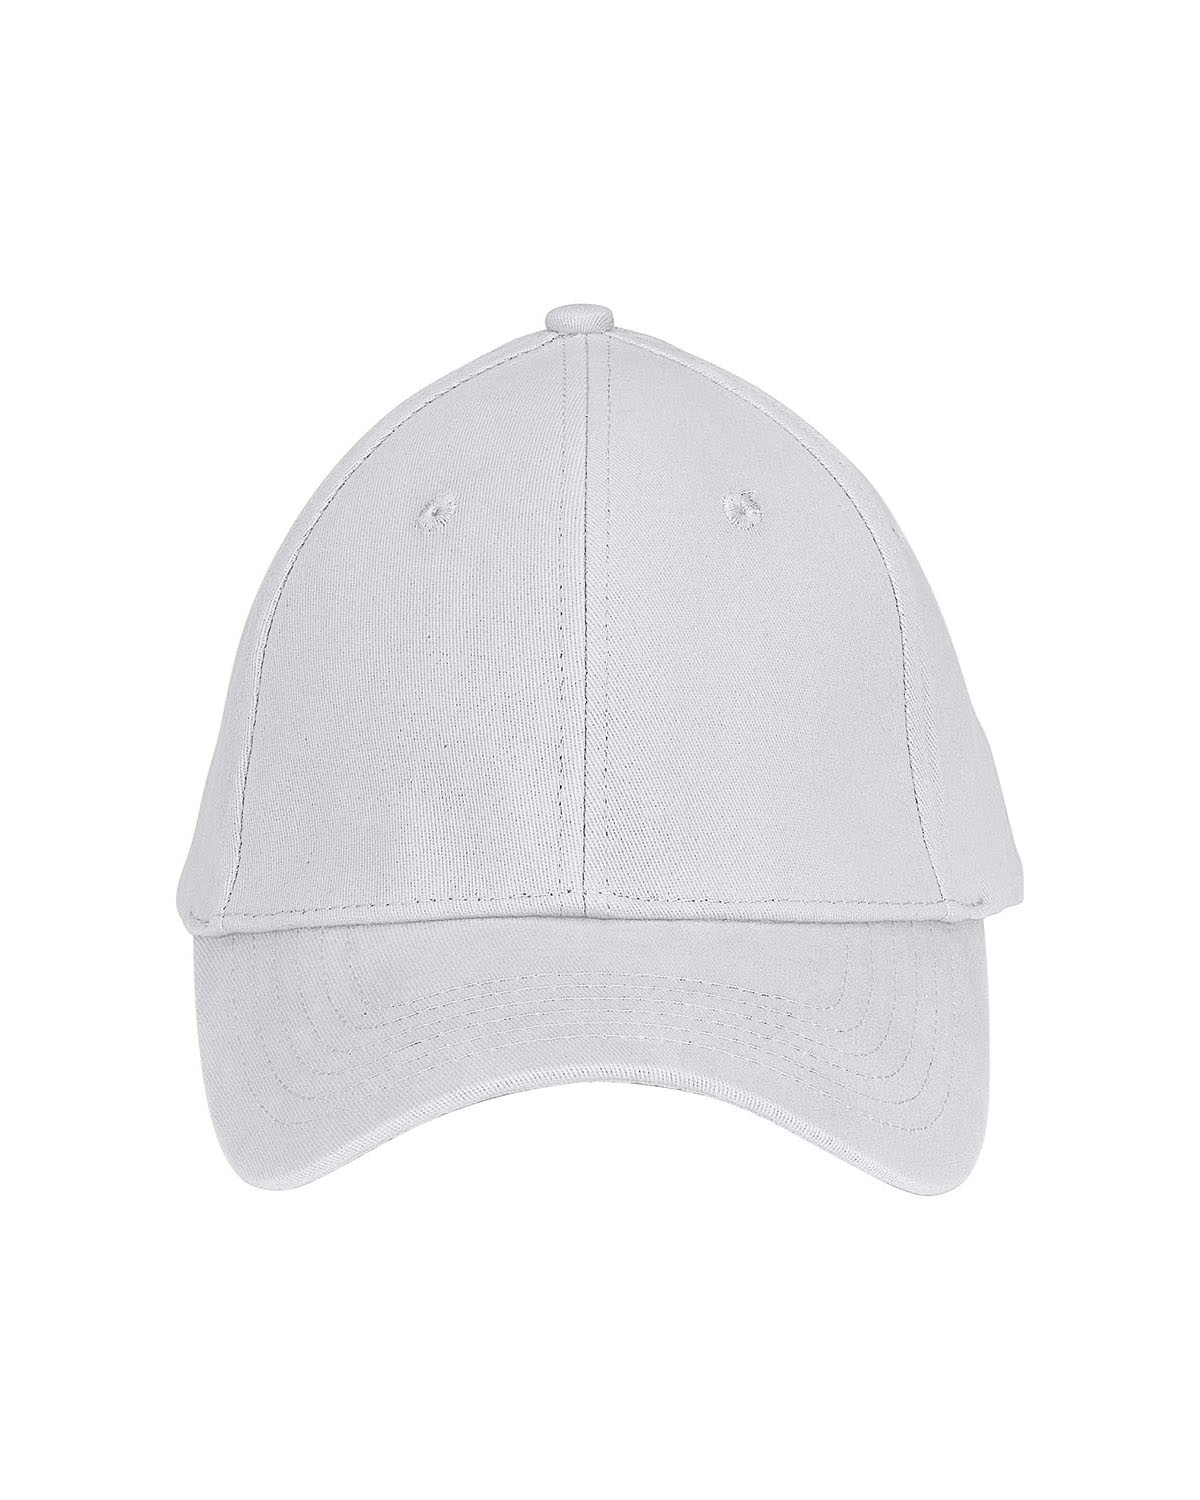 'Vantage 0710 Clutch Solid Stretch Fitted Constructed Twill Cap'